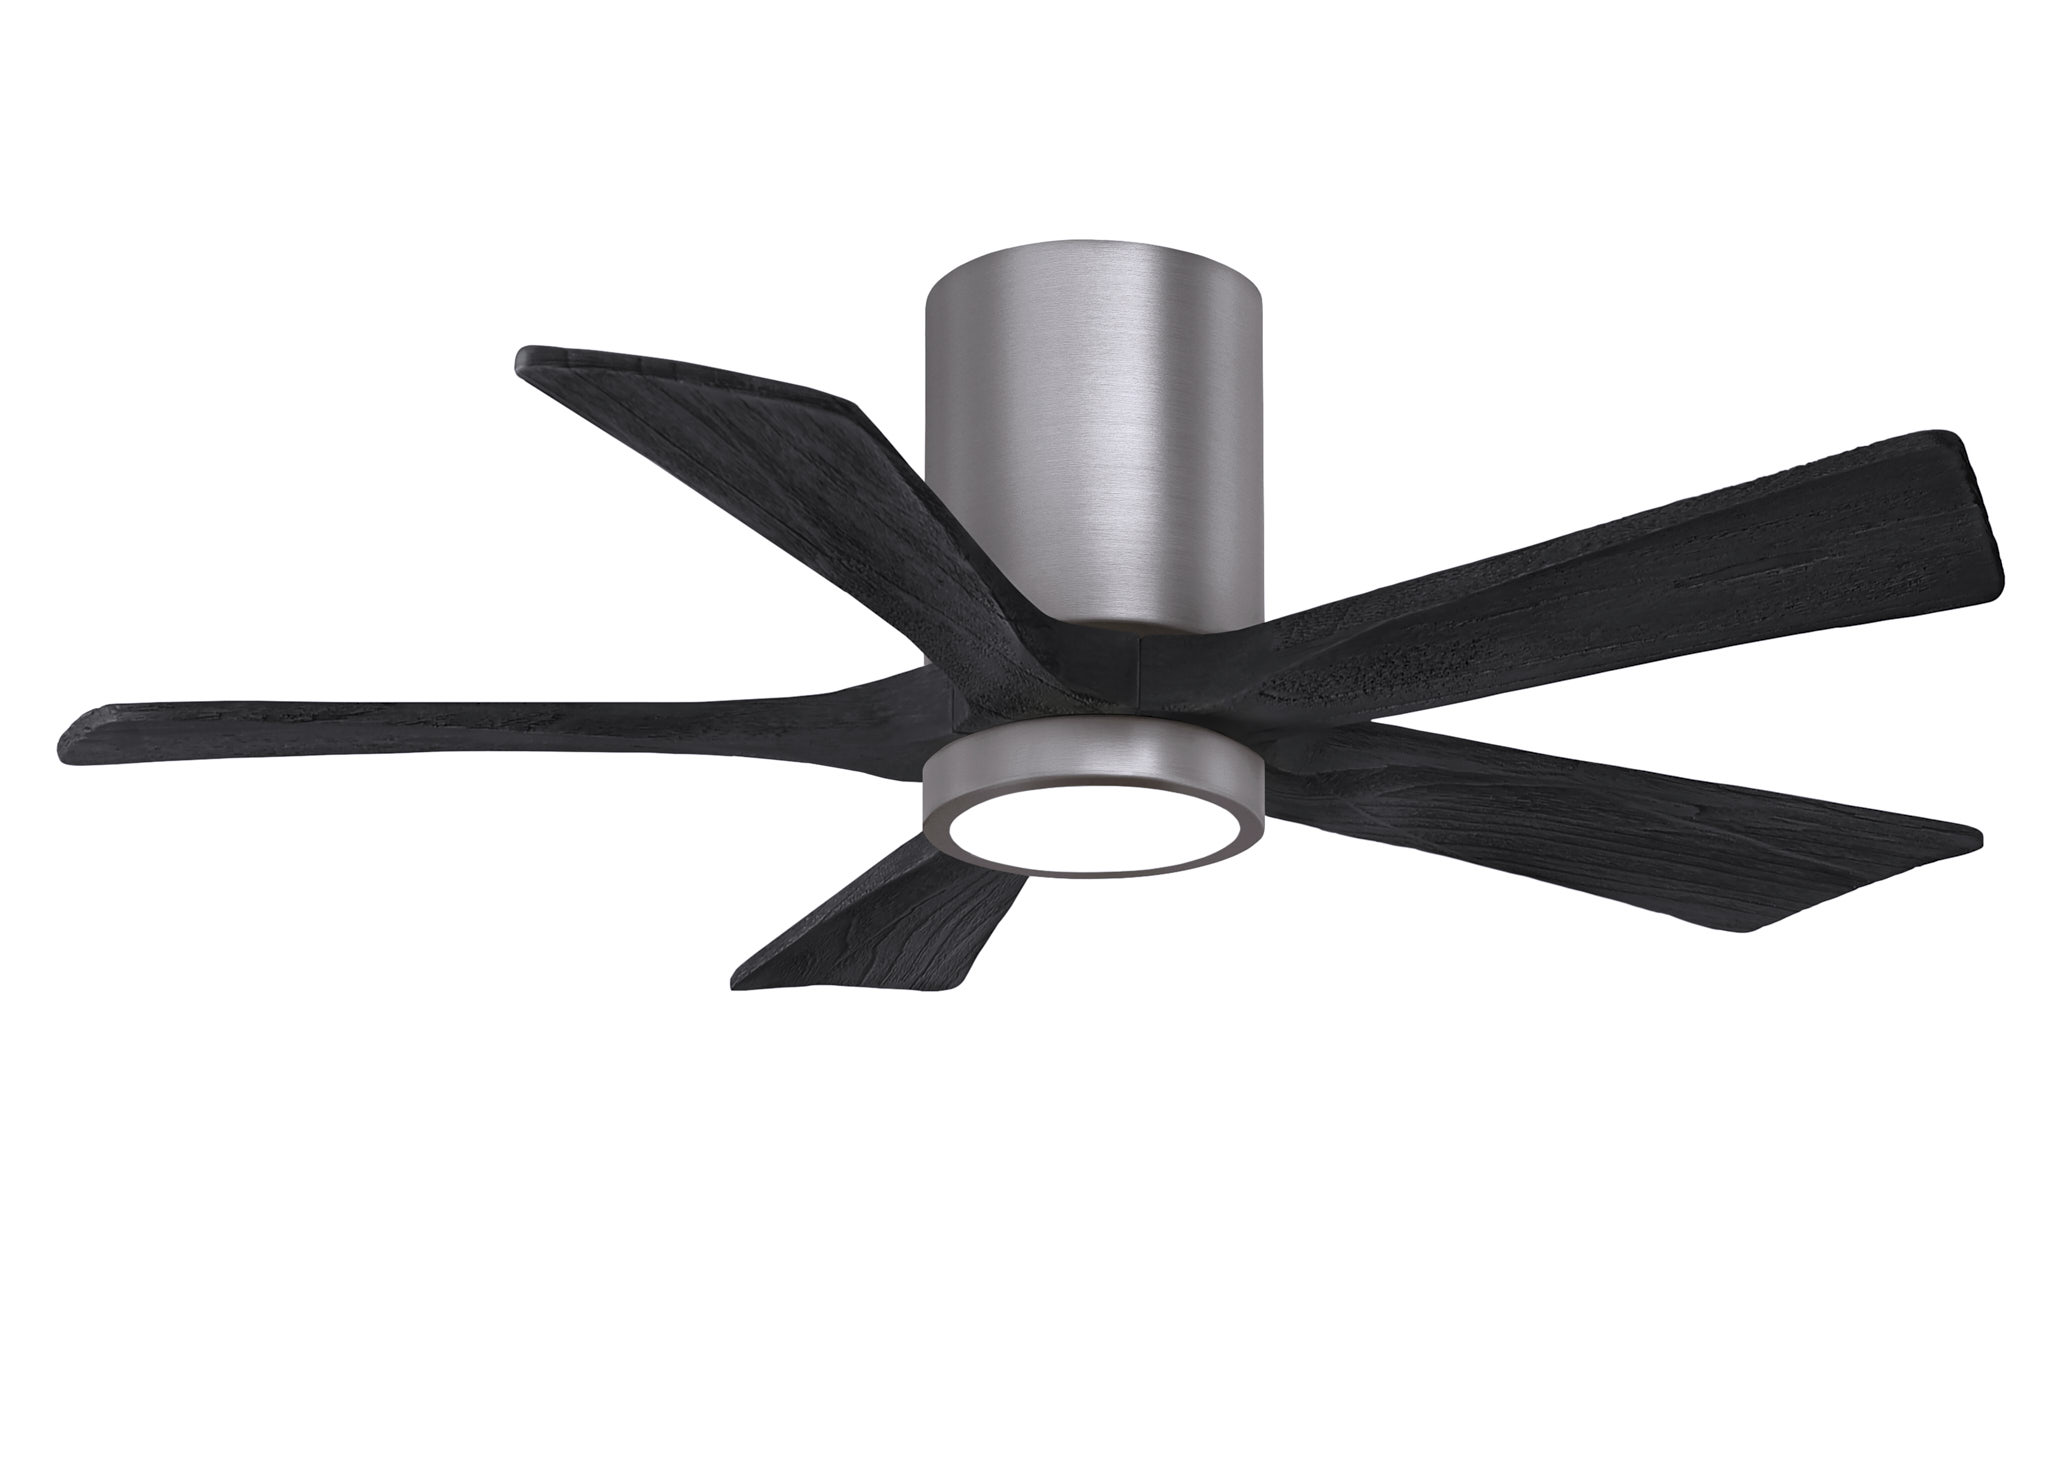 Irene-5HLK 6-speed ceiling fan in brushed pewter finish with 42